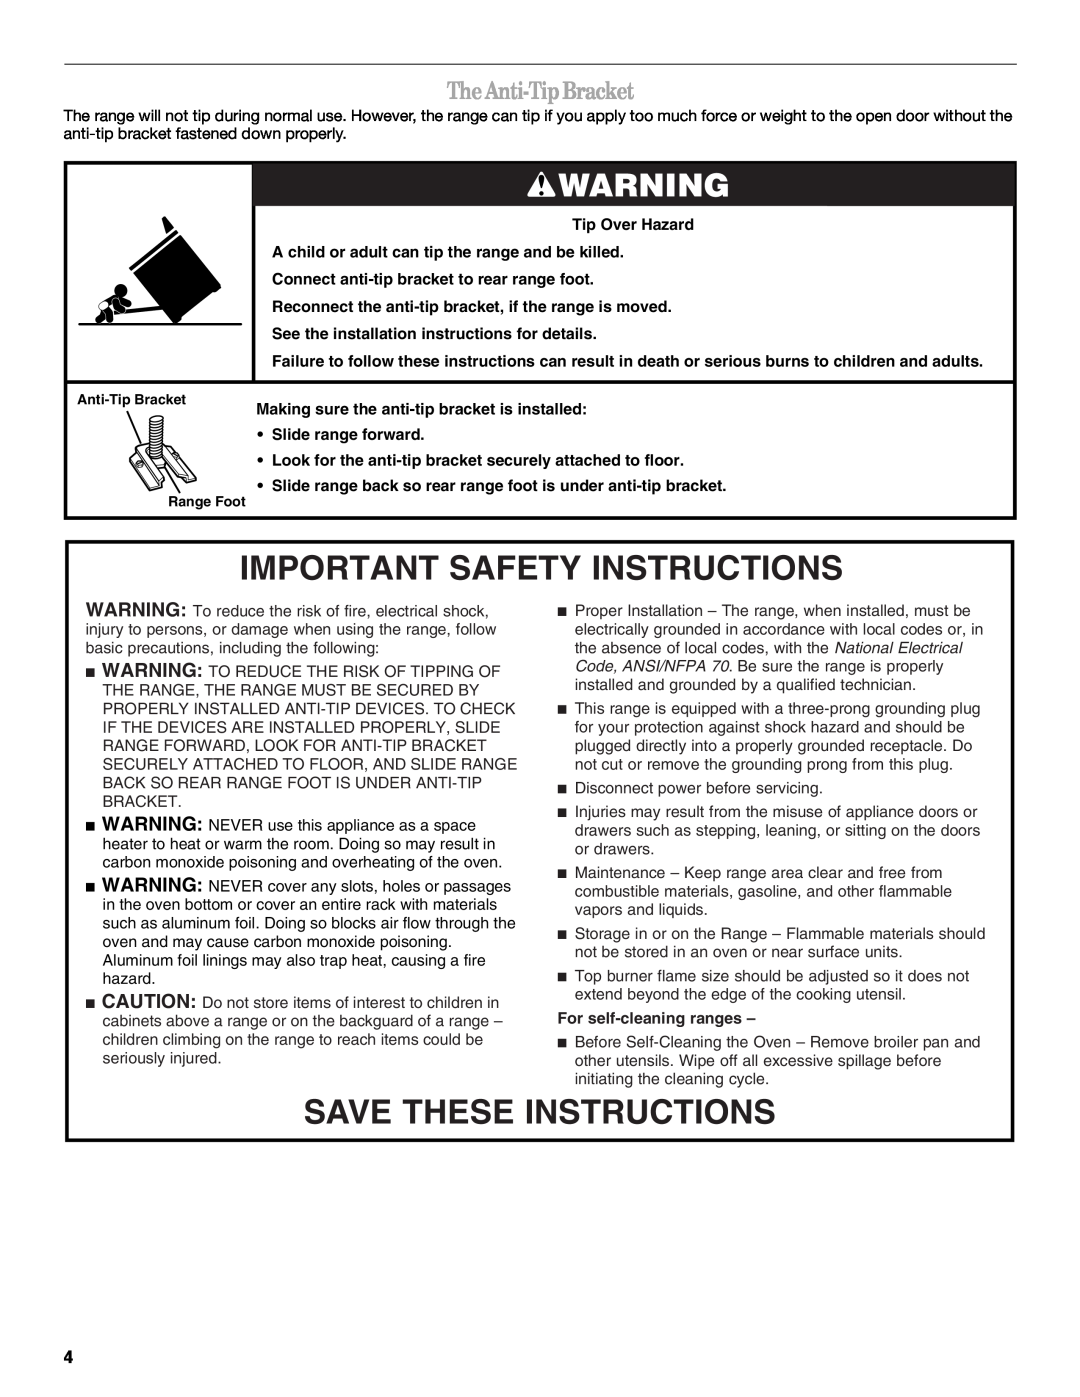 Amana AGR4422VDW Important Safety Instructions, Save These Instructions, TheAnti-TipBracket, For self-cleaning ranges 